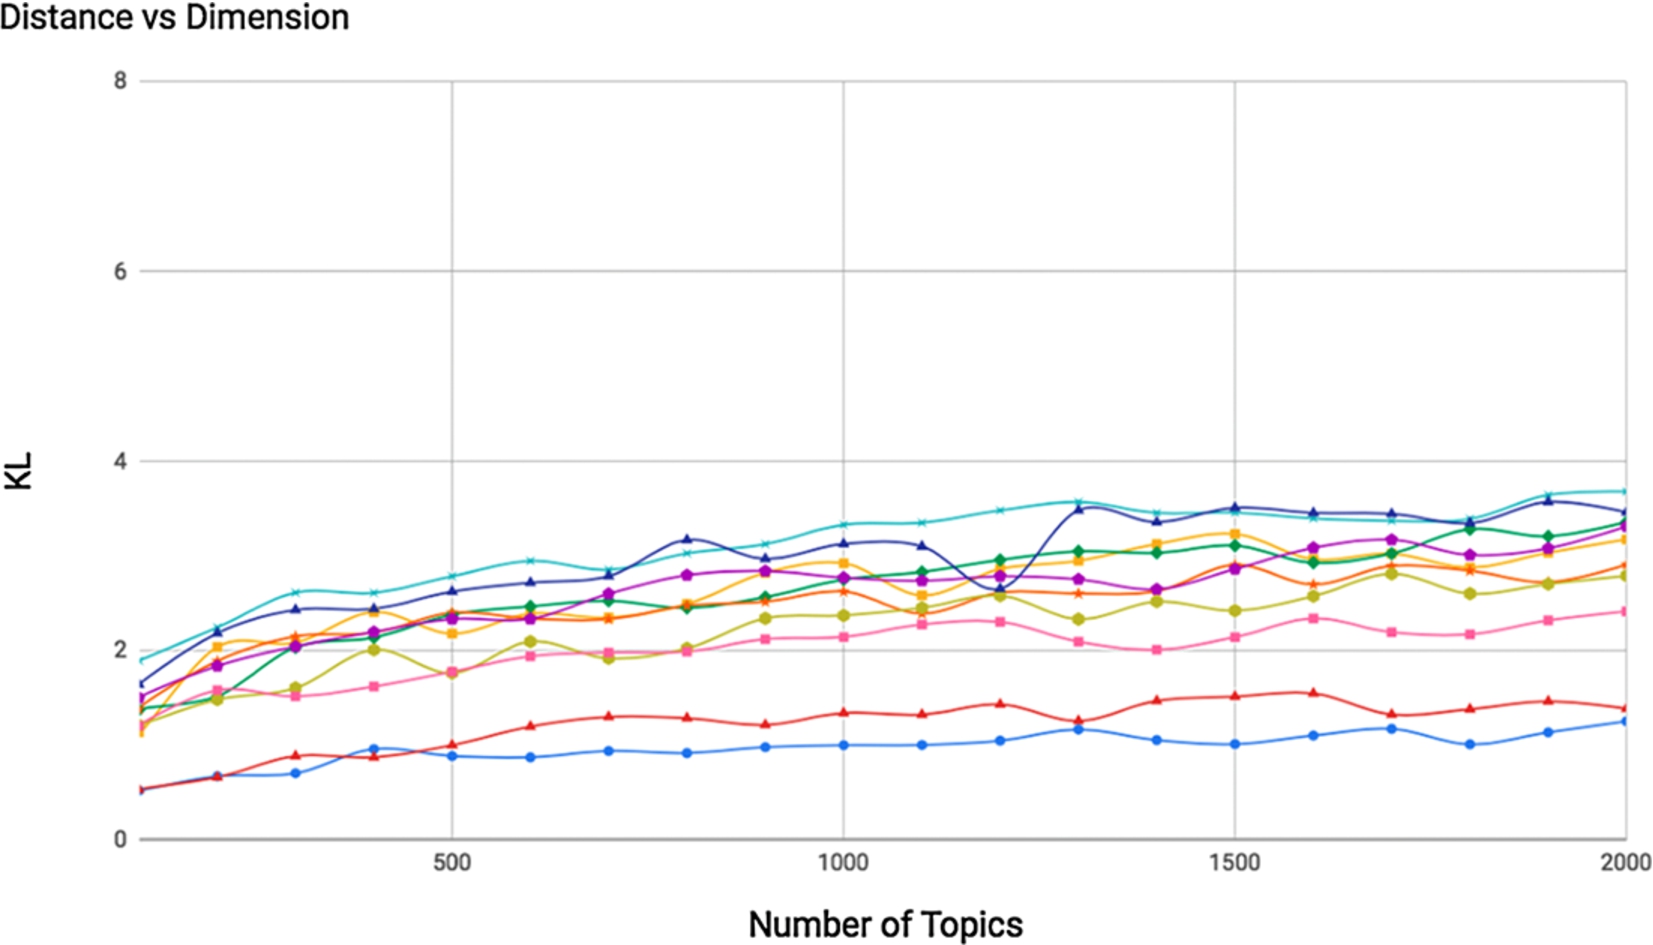 Distance values based on KL-divergence between 10 pair of documents from topic models with 100-to-2000 dimensions.